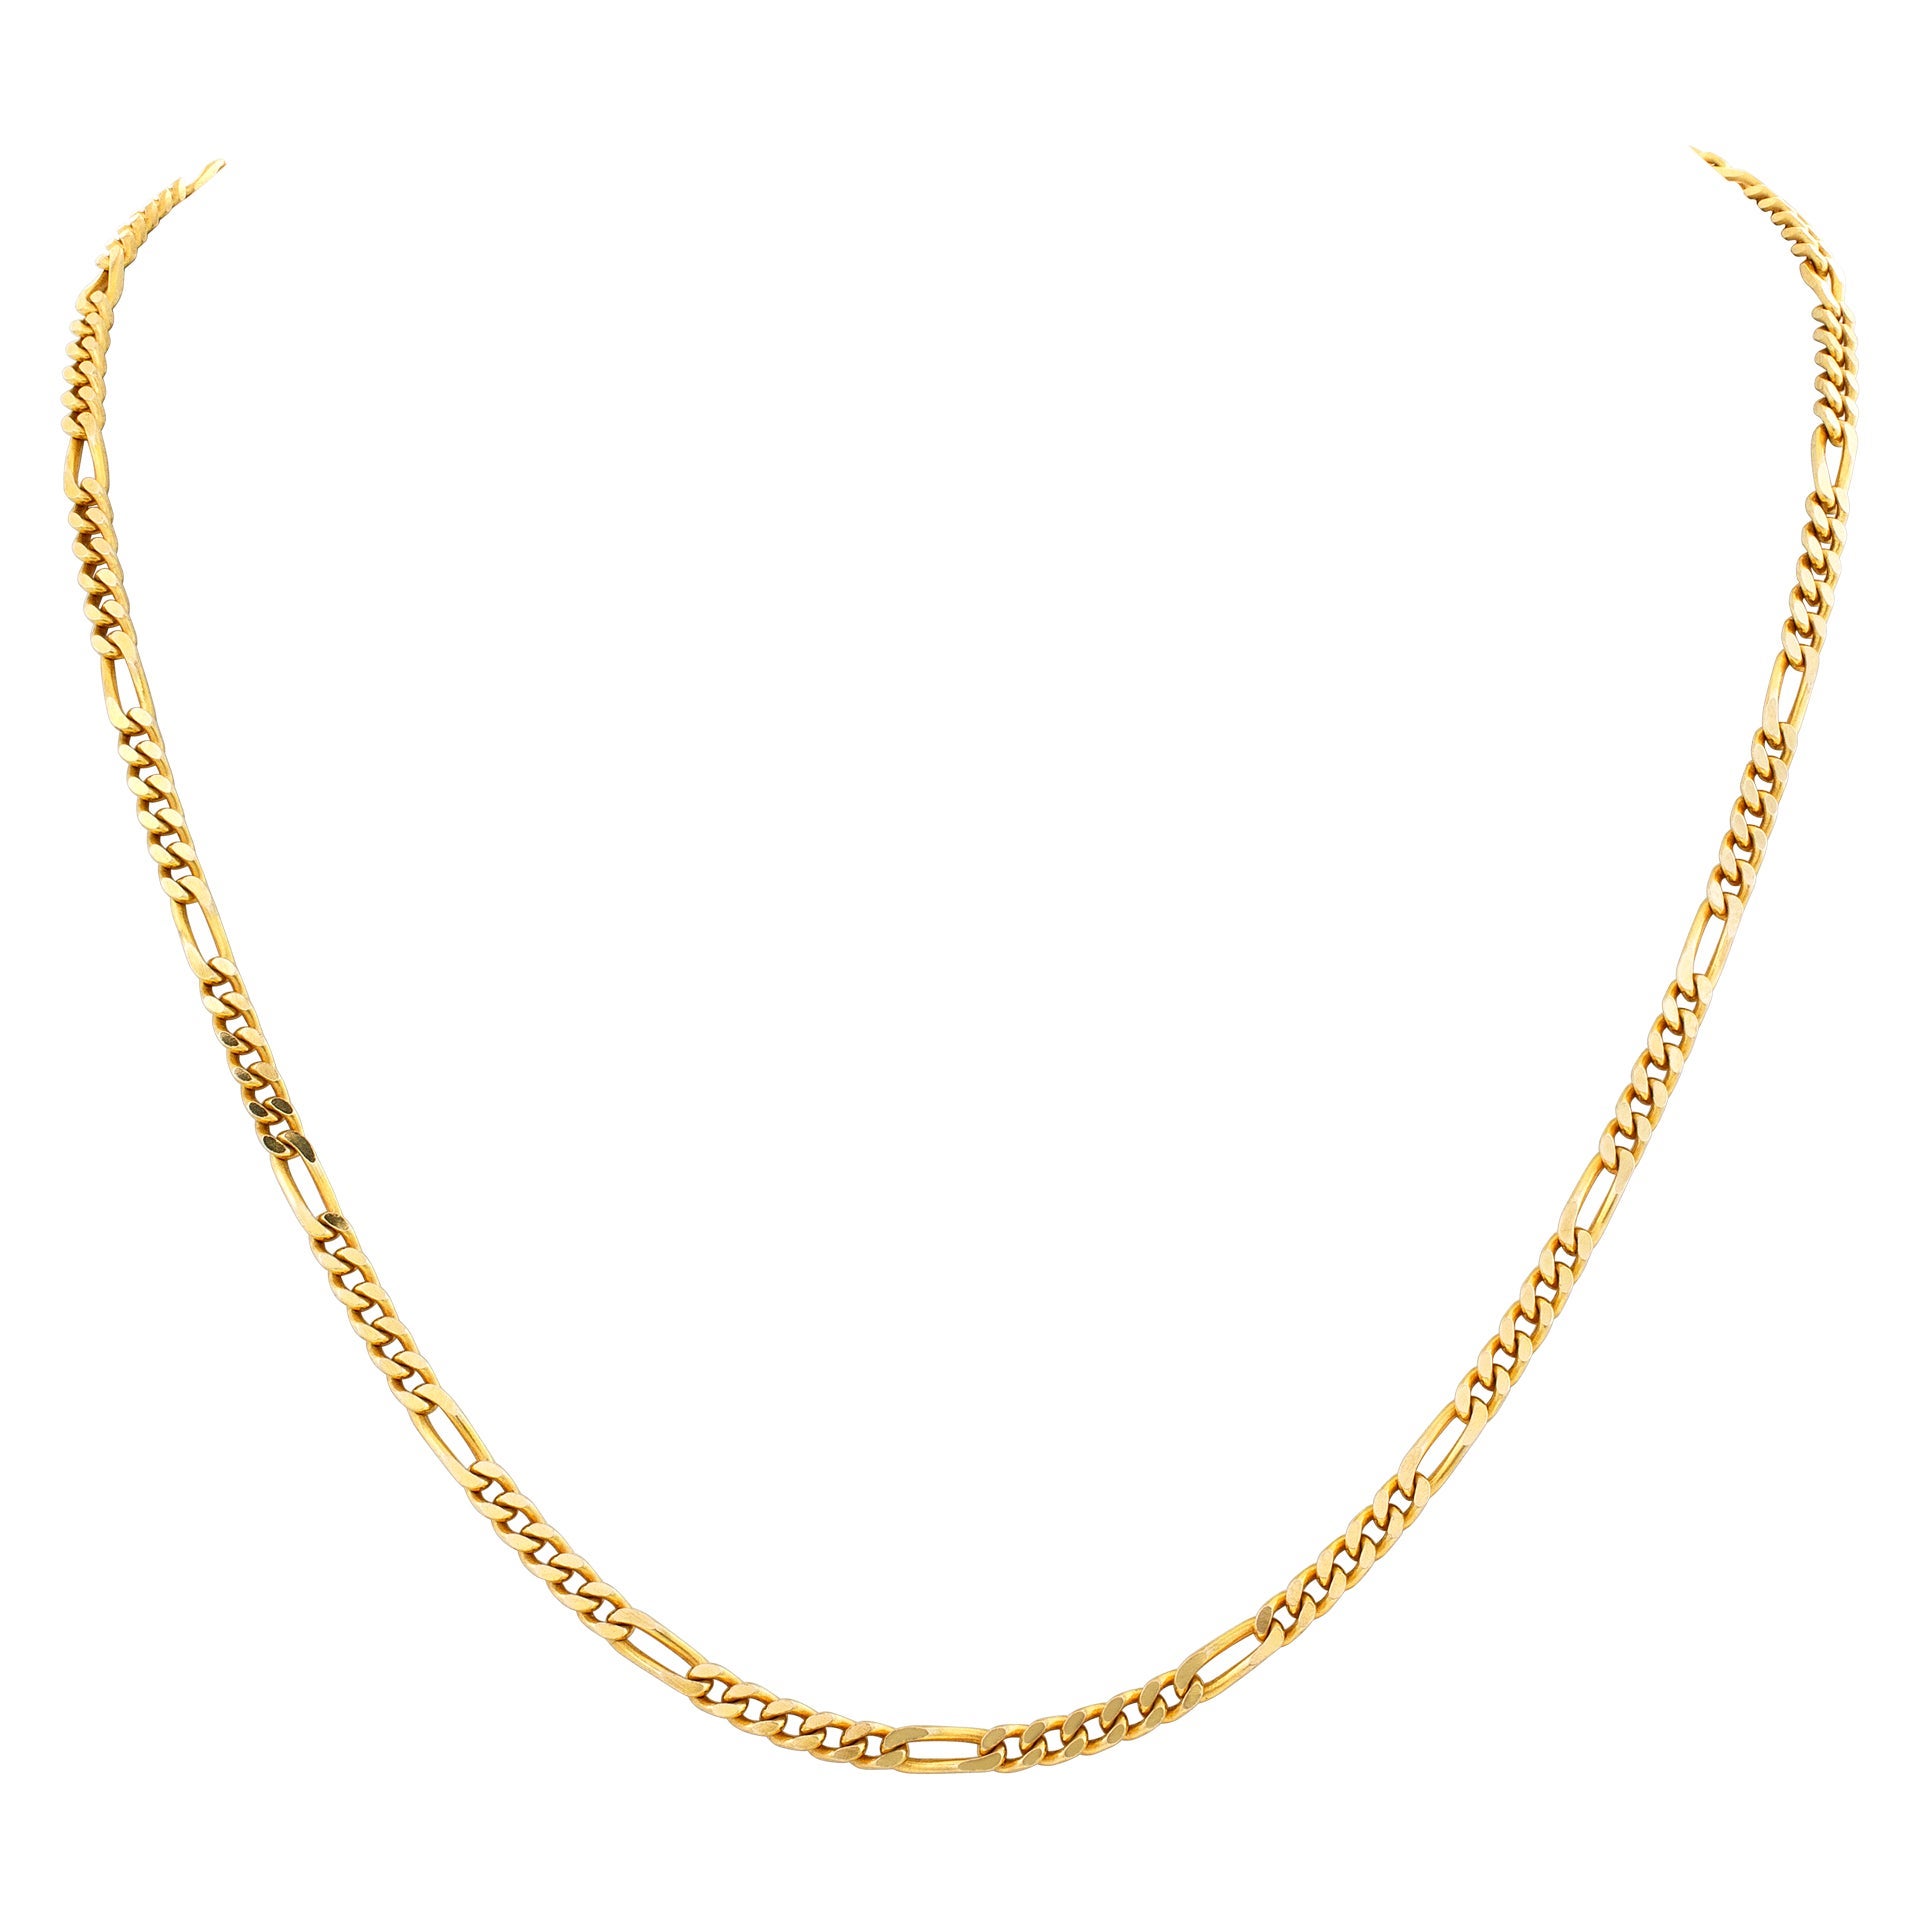 Figaro Style Link Chain in 14k Yellow Gold